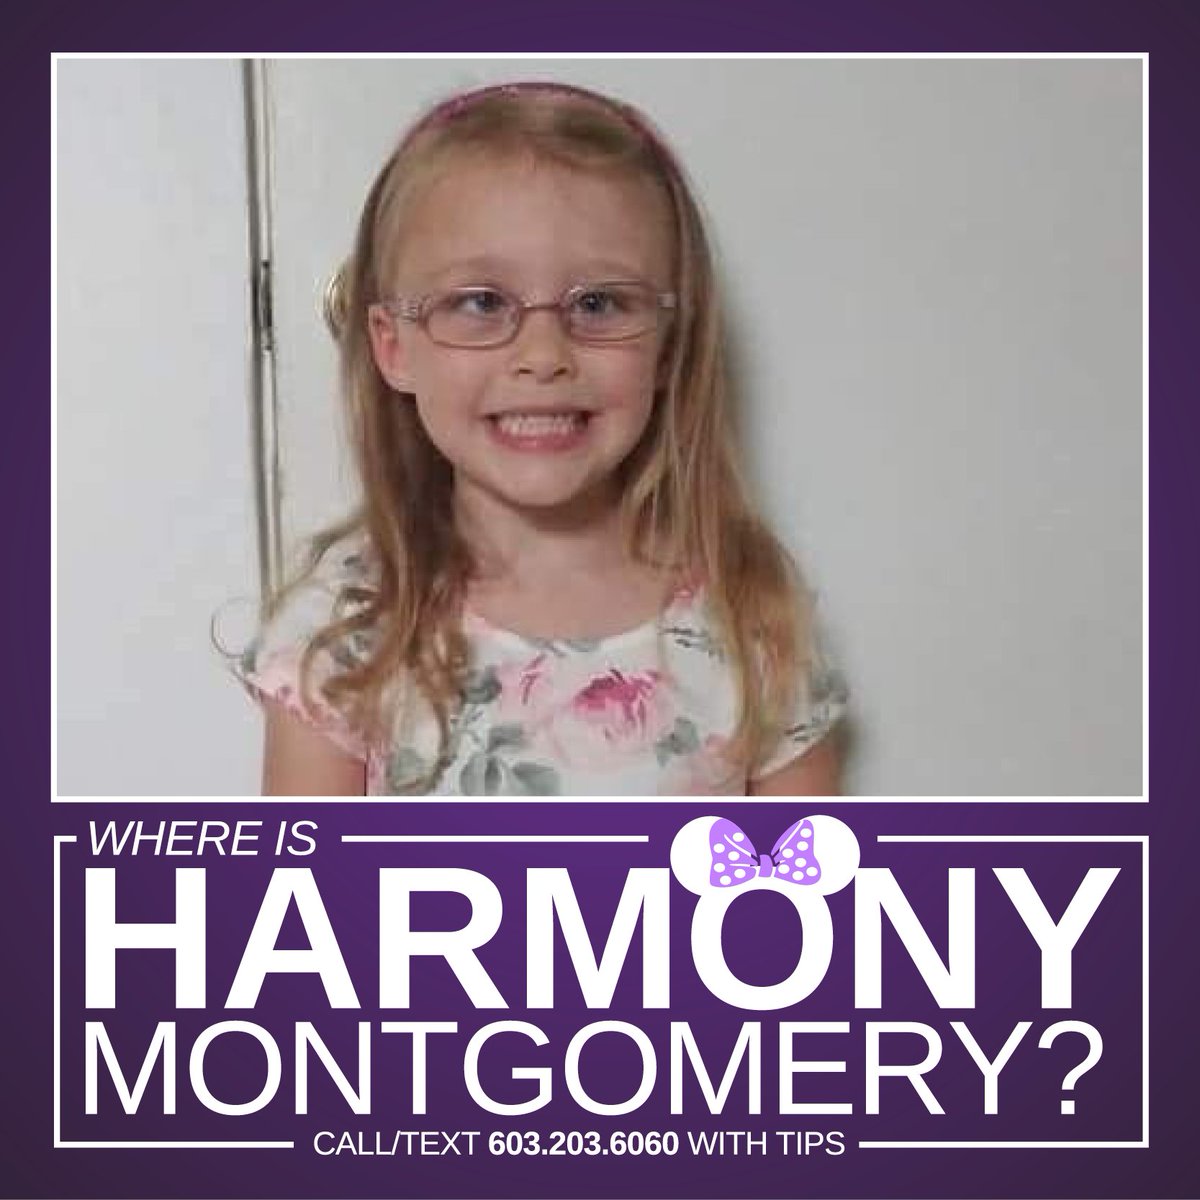 Hey, @NH_DOJ, it would be super cool if you make sure #MissingChild #HarmonyMontgomery does not become a cold case. 💜 #JohnFormella #ChrisSununu #AdamMontgomery #NewHampshire #NewEngland #Patriots #RedSox #Celtics #Maine #Massachusetts #MLB #NFL #Manchester #Boston #Election2022